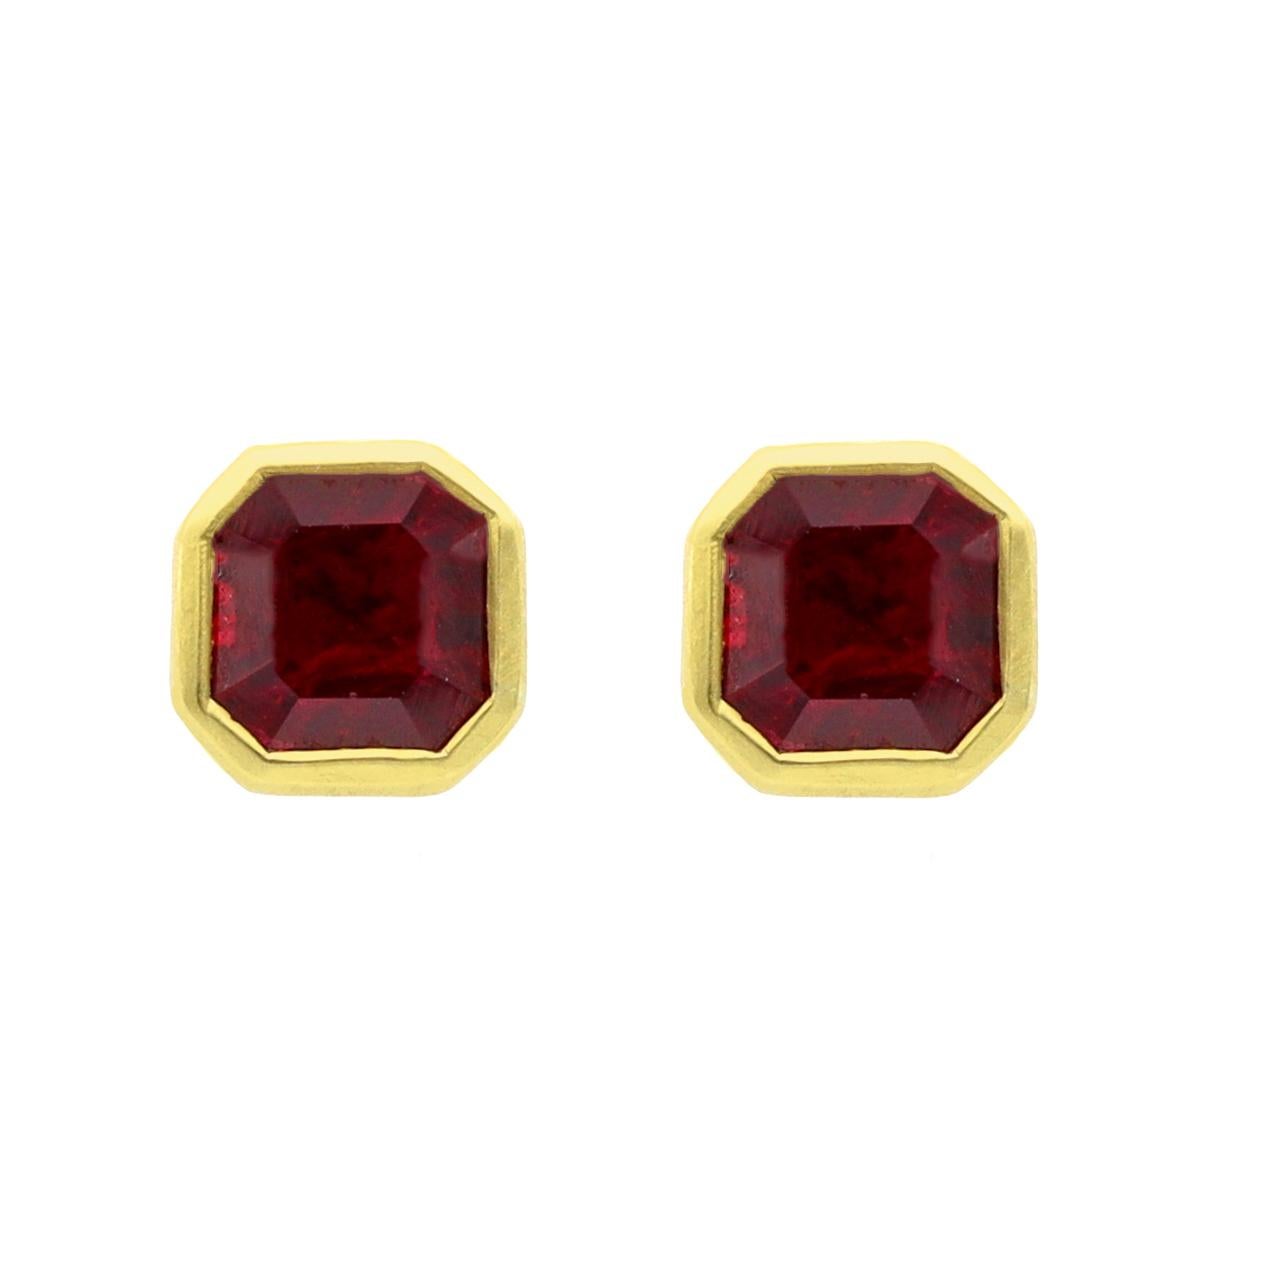 18 Karat Matte Yellow Gold 2.00 Carat Ruby Stud Earrings

This exemplary pigeon-blood square-octagonal cut ruby earring pair is truly fantastic. It’s a specially modified-square radiant cut flawless luster red ruby pair enclosed in matt finish